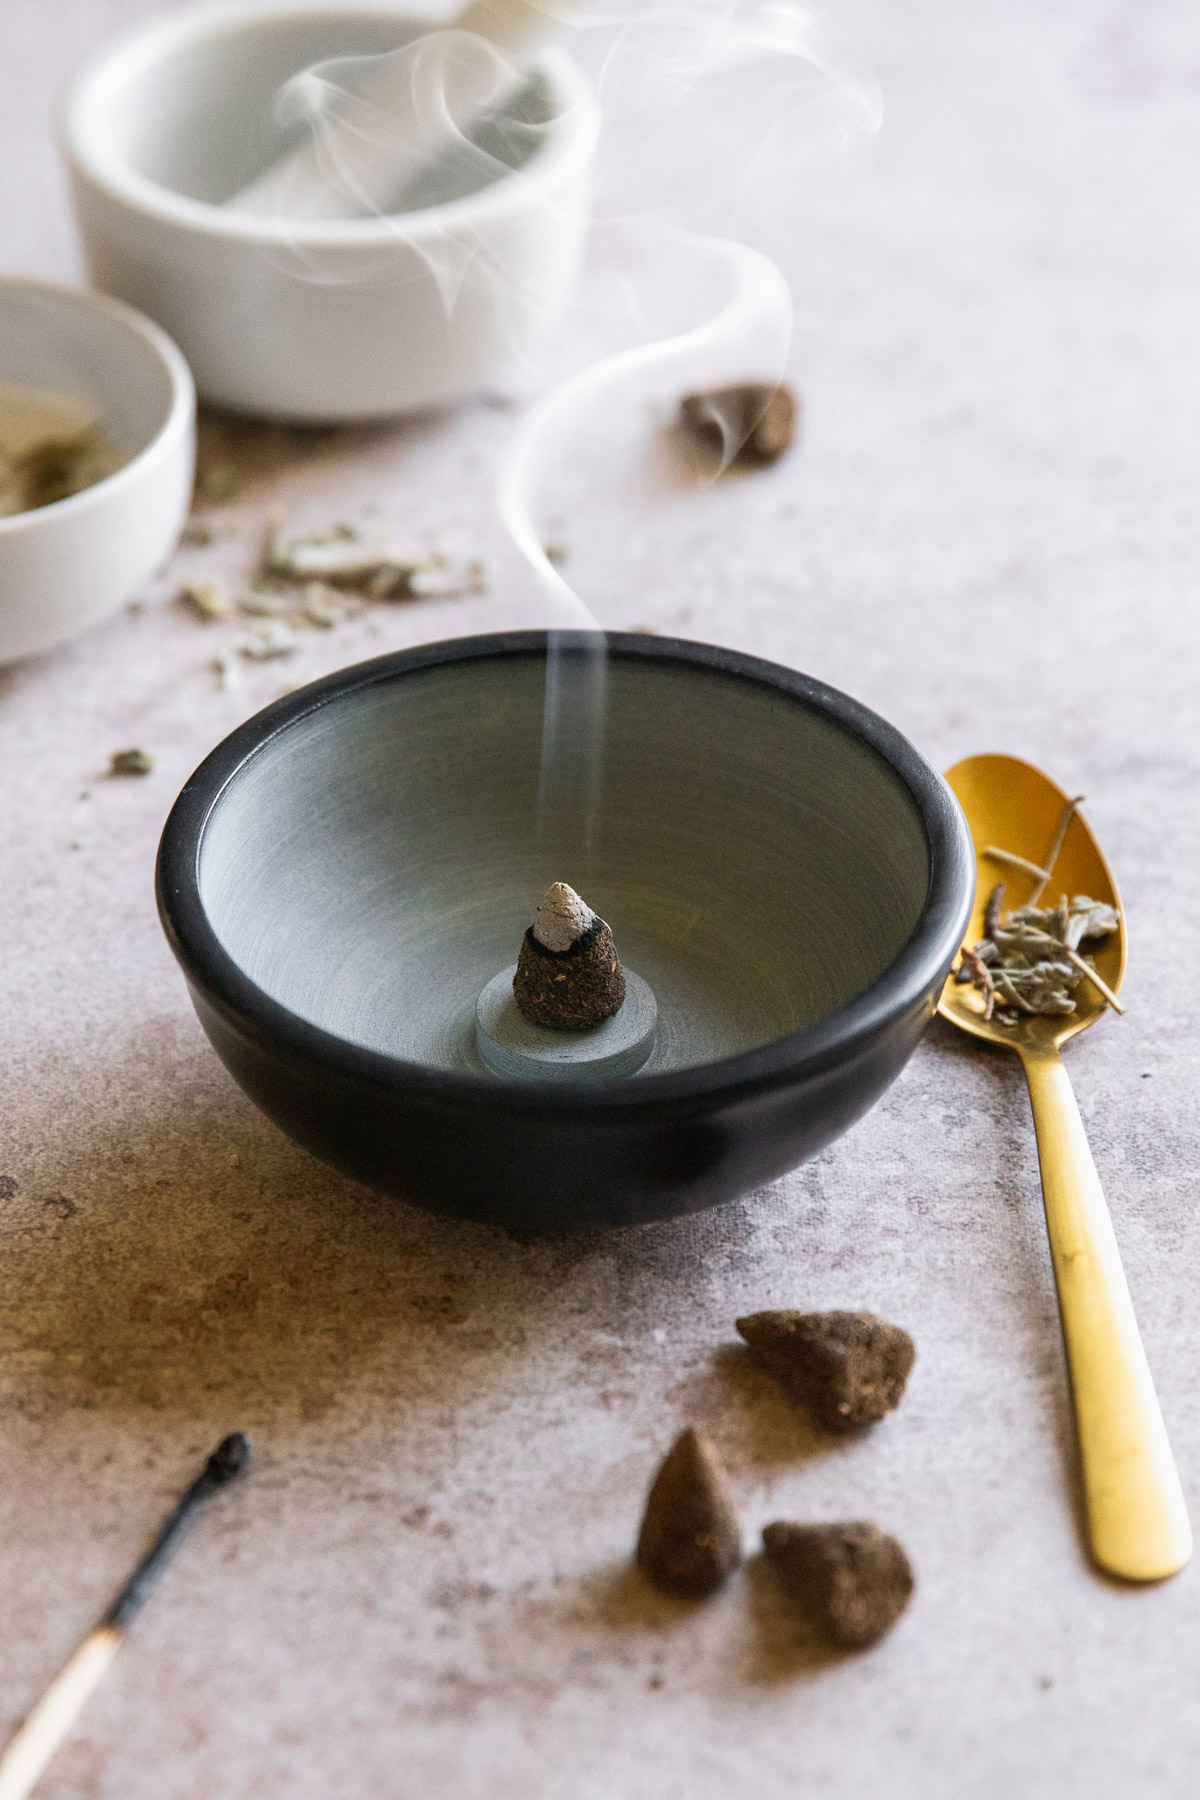 Ways to use incense around the house